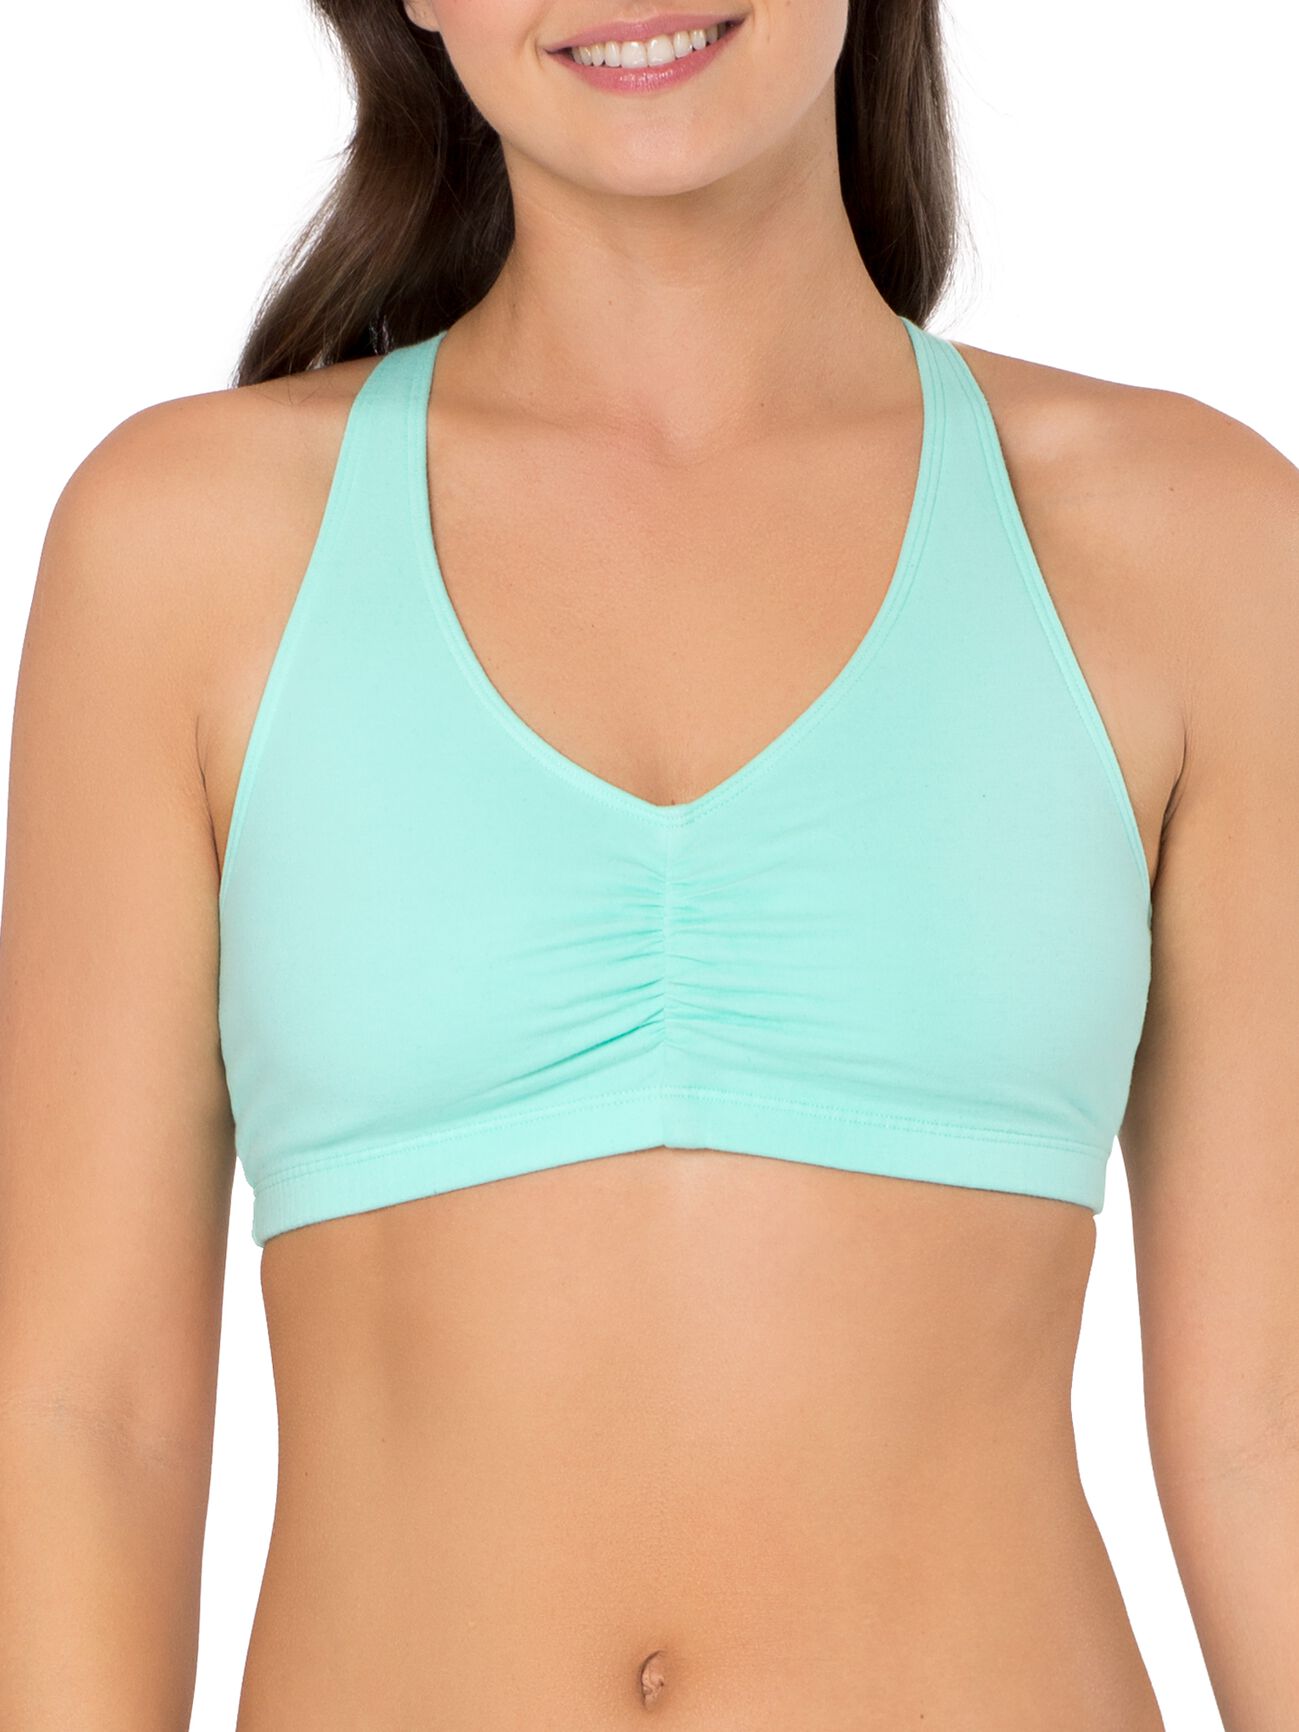 How to Put on a Racerback Bra